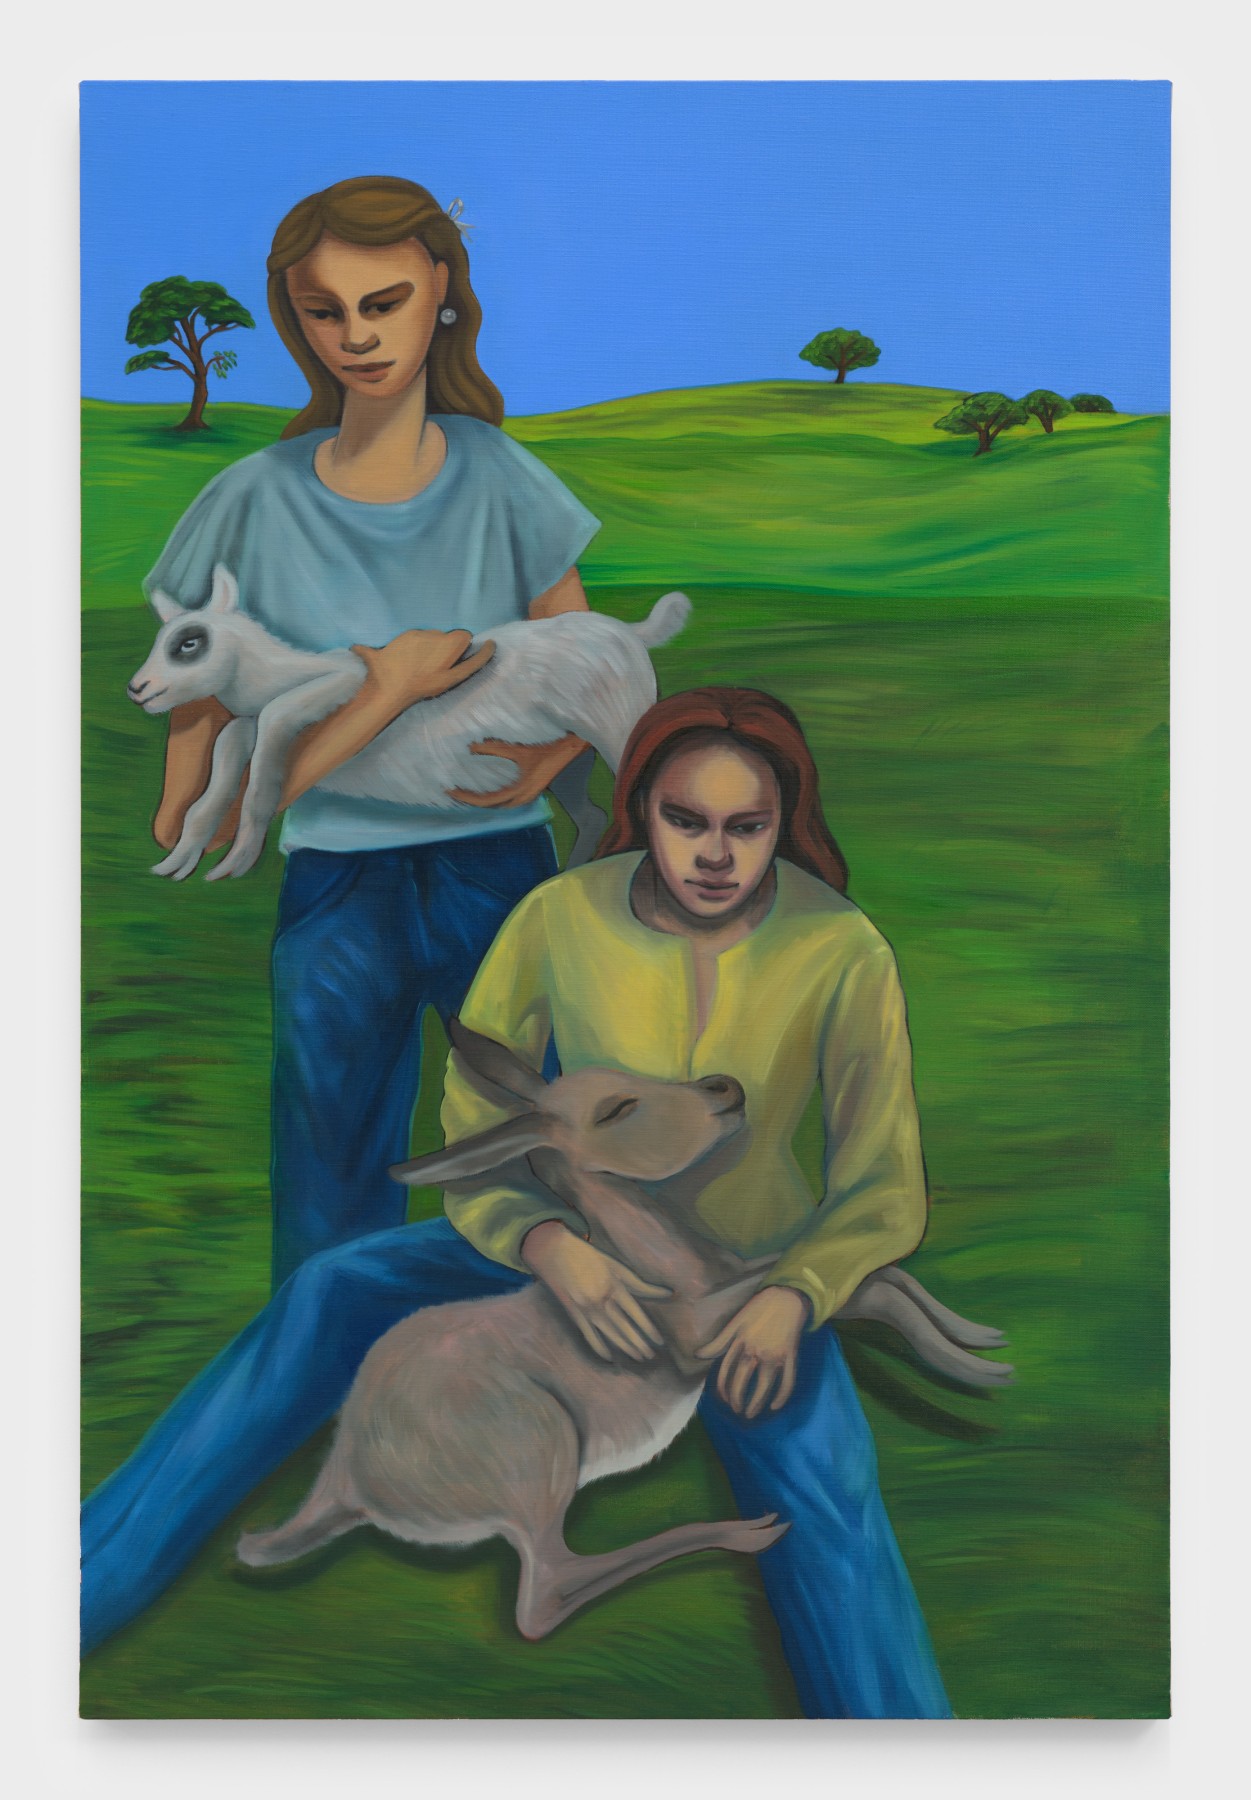 Bambou Gili's artwork "The Favorites". Two women wearing blue jeans and t-shirts hold a fawn and a lamb in a green field with blue skies. 45 x 30 in (114.3 x 76.2 cm), oil on linen, 2023